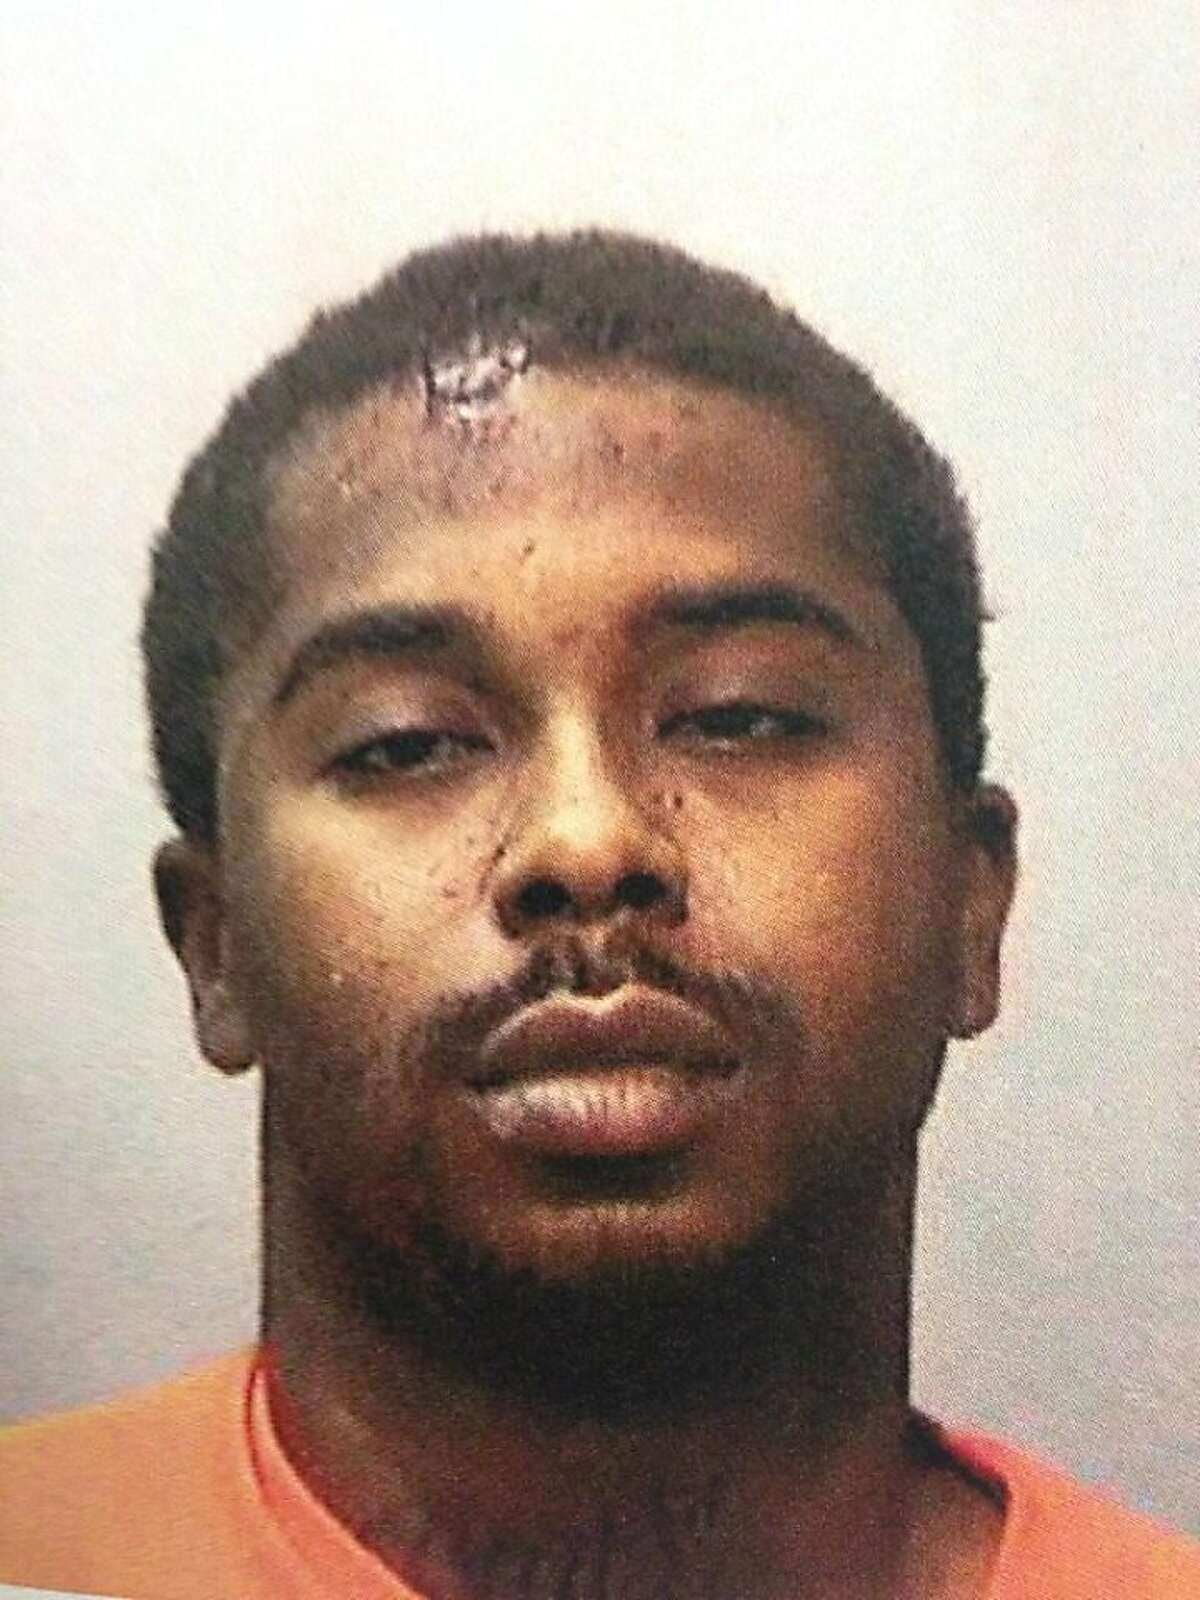 Jacques Samuel, suspected of leading San Francisco police on a high-speed chase the night of Dec. 30, 2013.